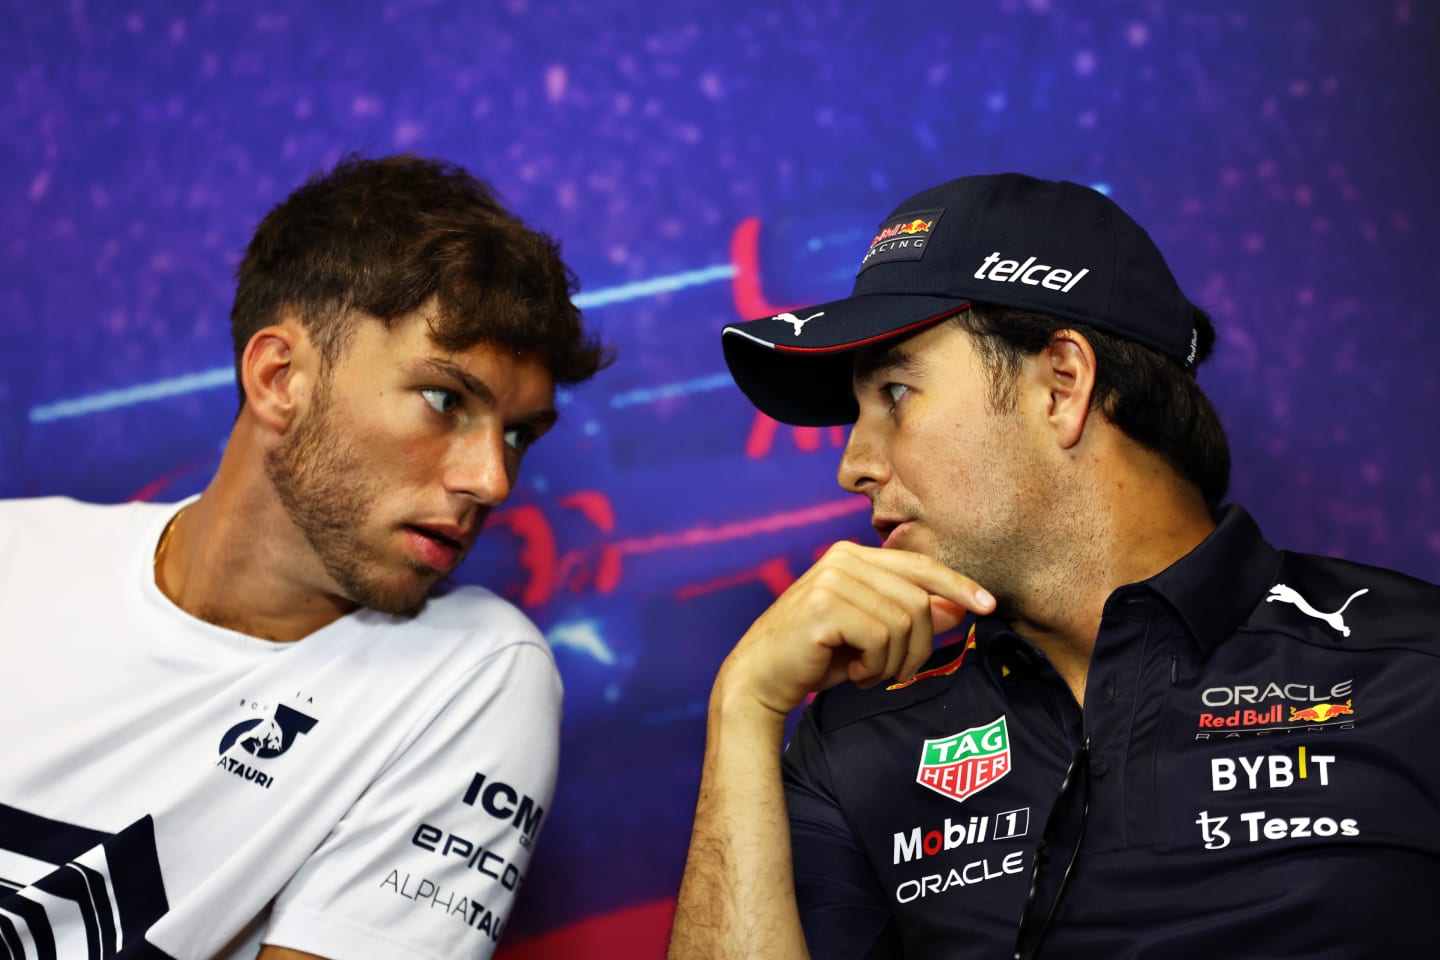 LE CASTELLET, FRANCE - JULY 21: Pierre Gasly of France and Scuderia AlphaTauri and Sergio Perez of Mexico and Oracle Red Bull Racing talk in the Drivers Press Conference during previews ahead of the F1 Grand Prix of France at Circuit Paul Ricard on July 21, 2022 in Le Castellet, France. (Photo by Bryn Lennon/Getty Images)